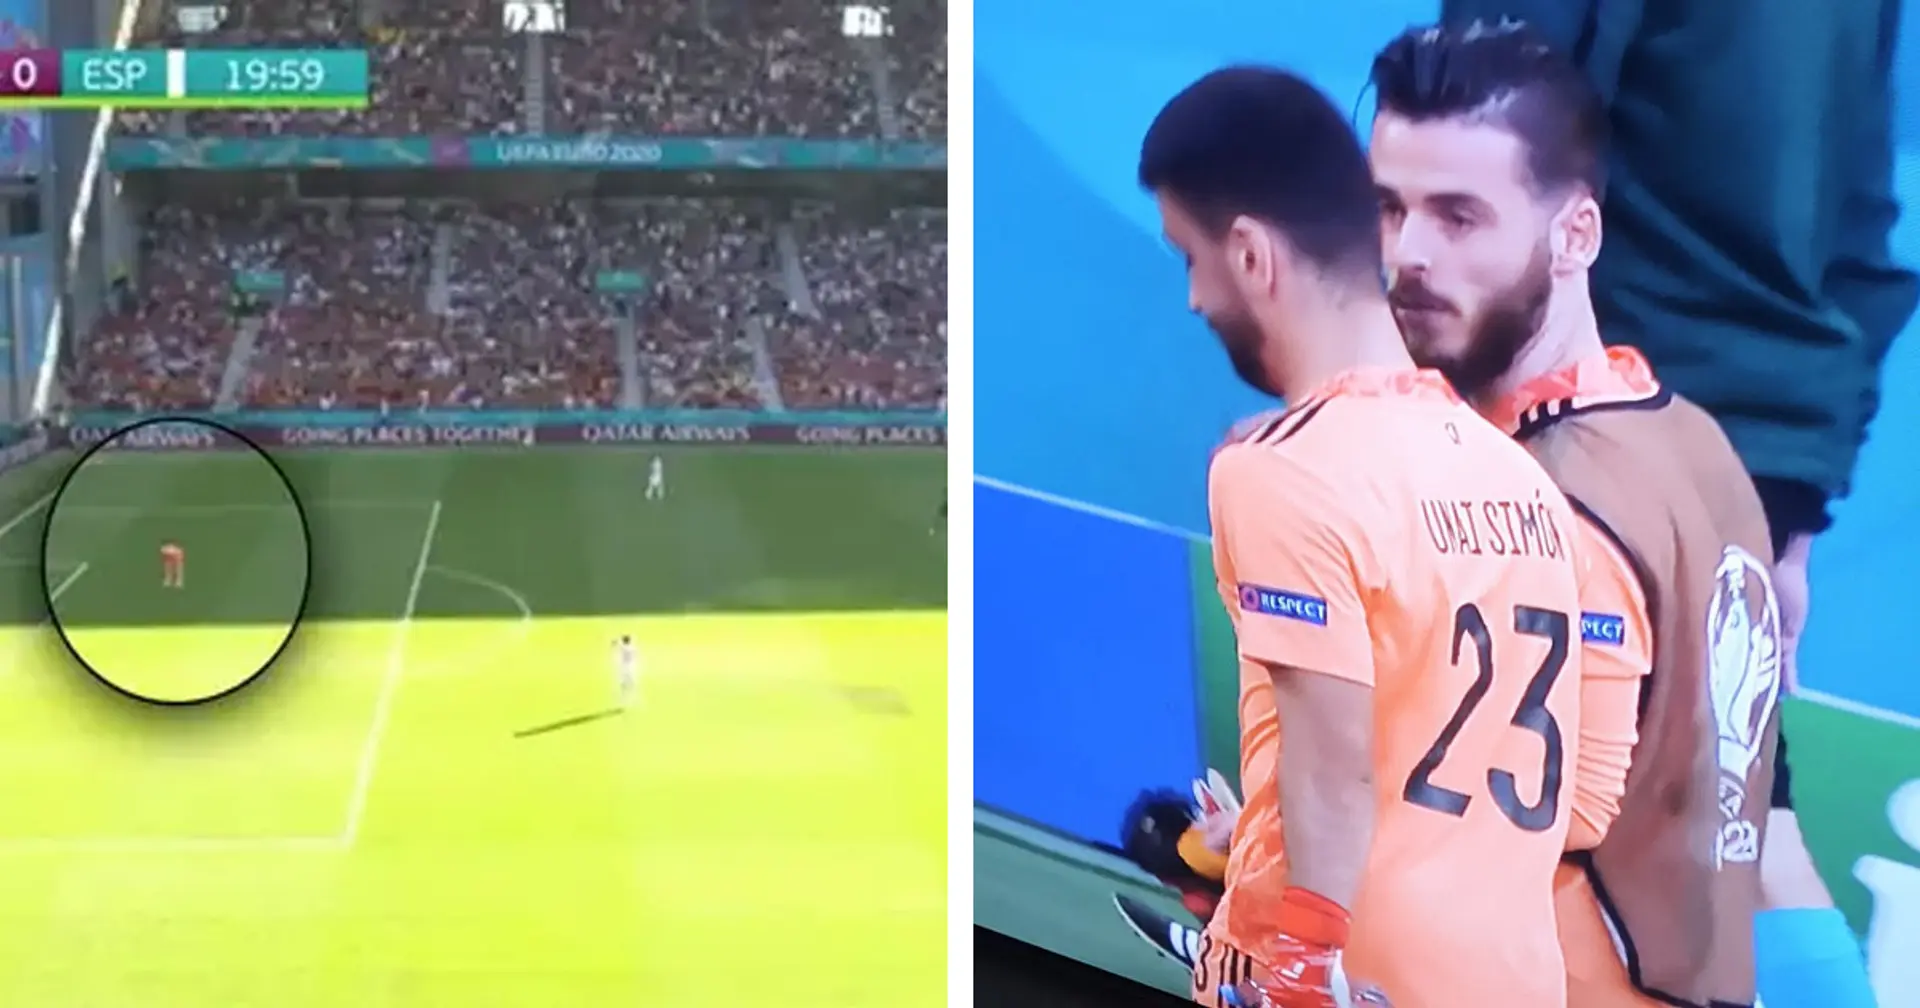 Explained: How De Gea helped Unai Simon recover from own goal nightmare in Spain clash